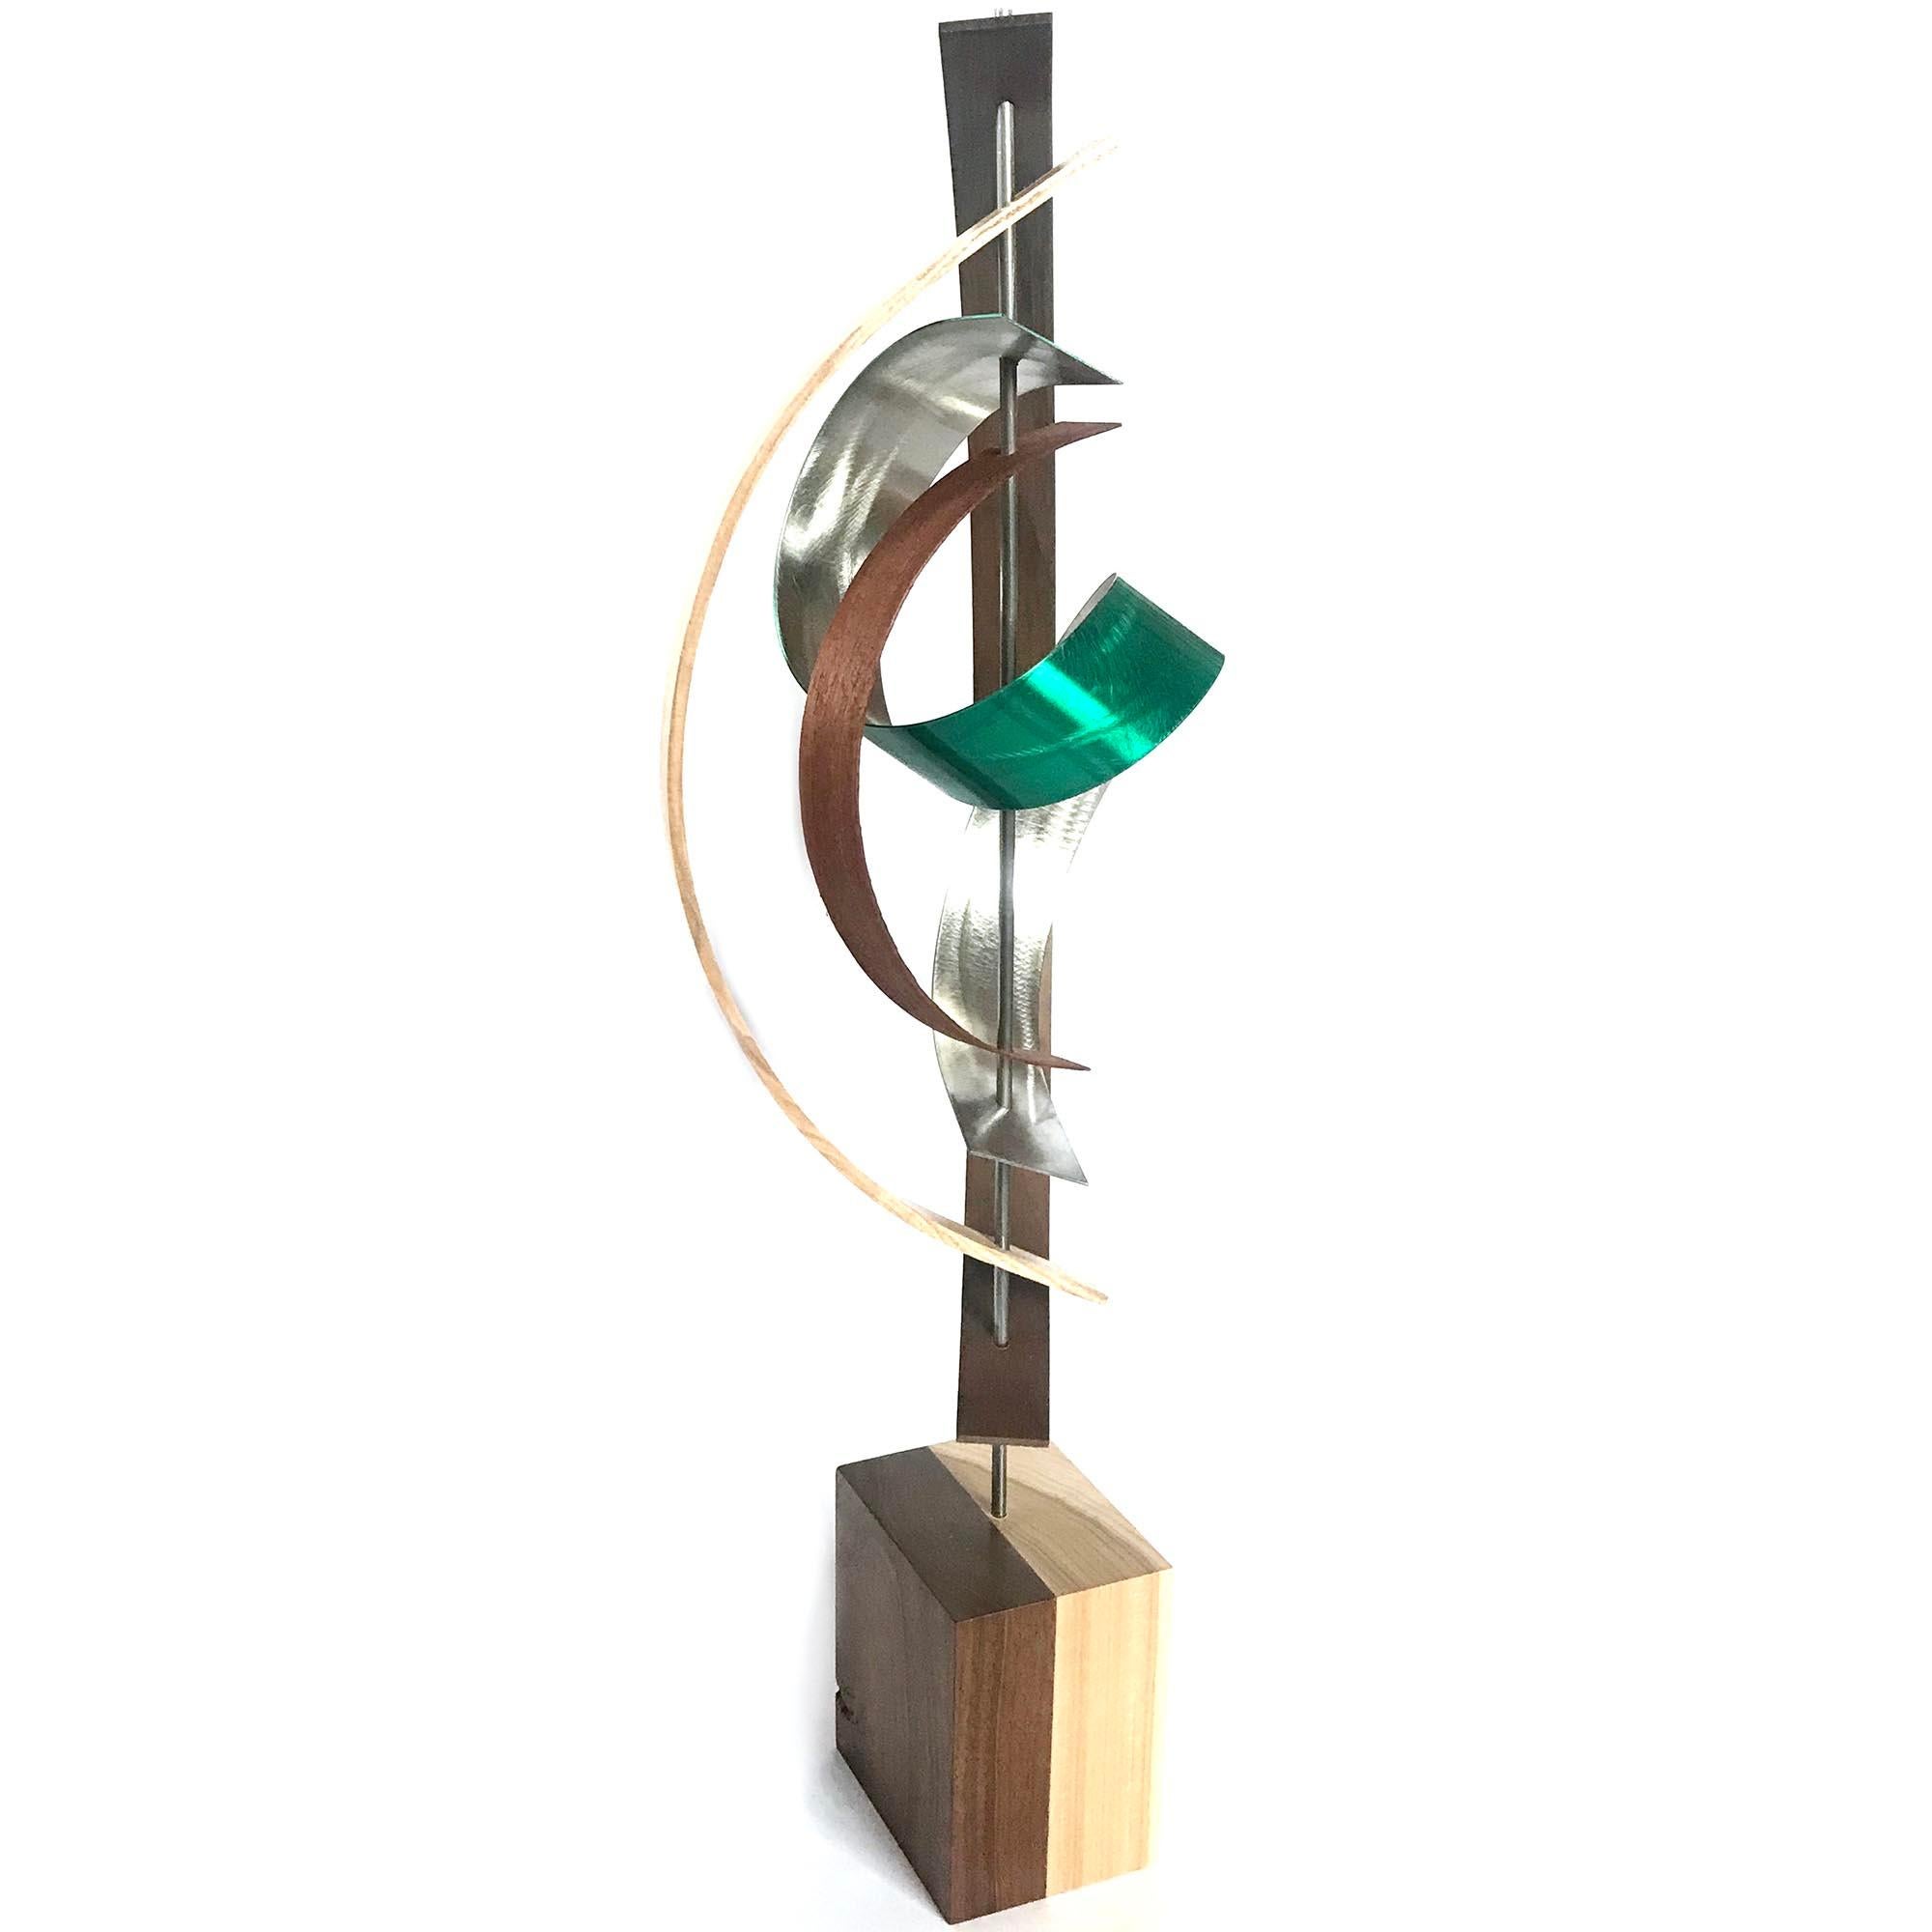 Mid-Century Modern Inspired,  Contemporary Wood Metal Sculpture, by Jeff L. 1